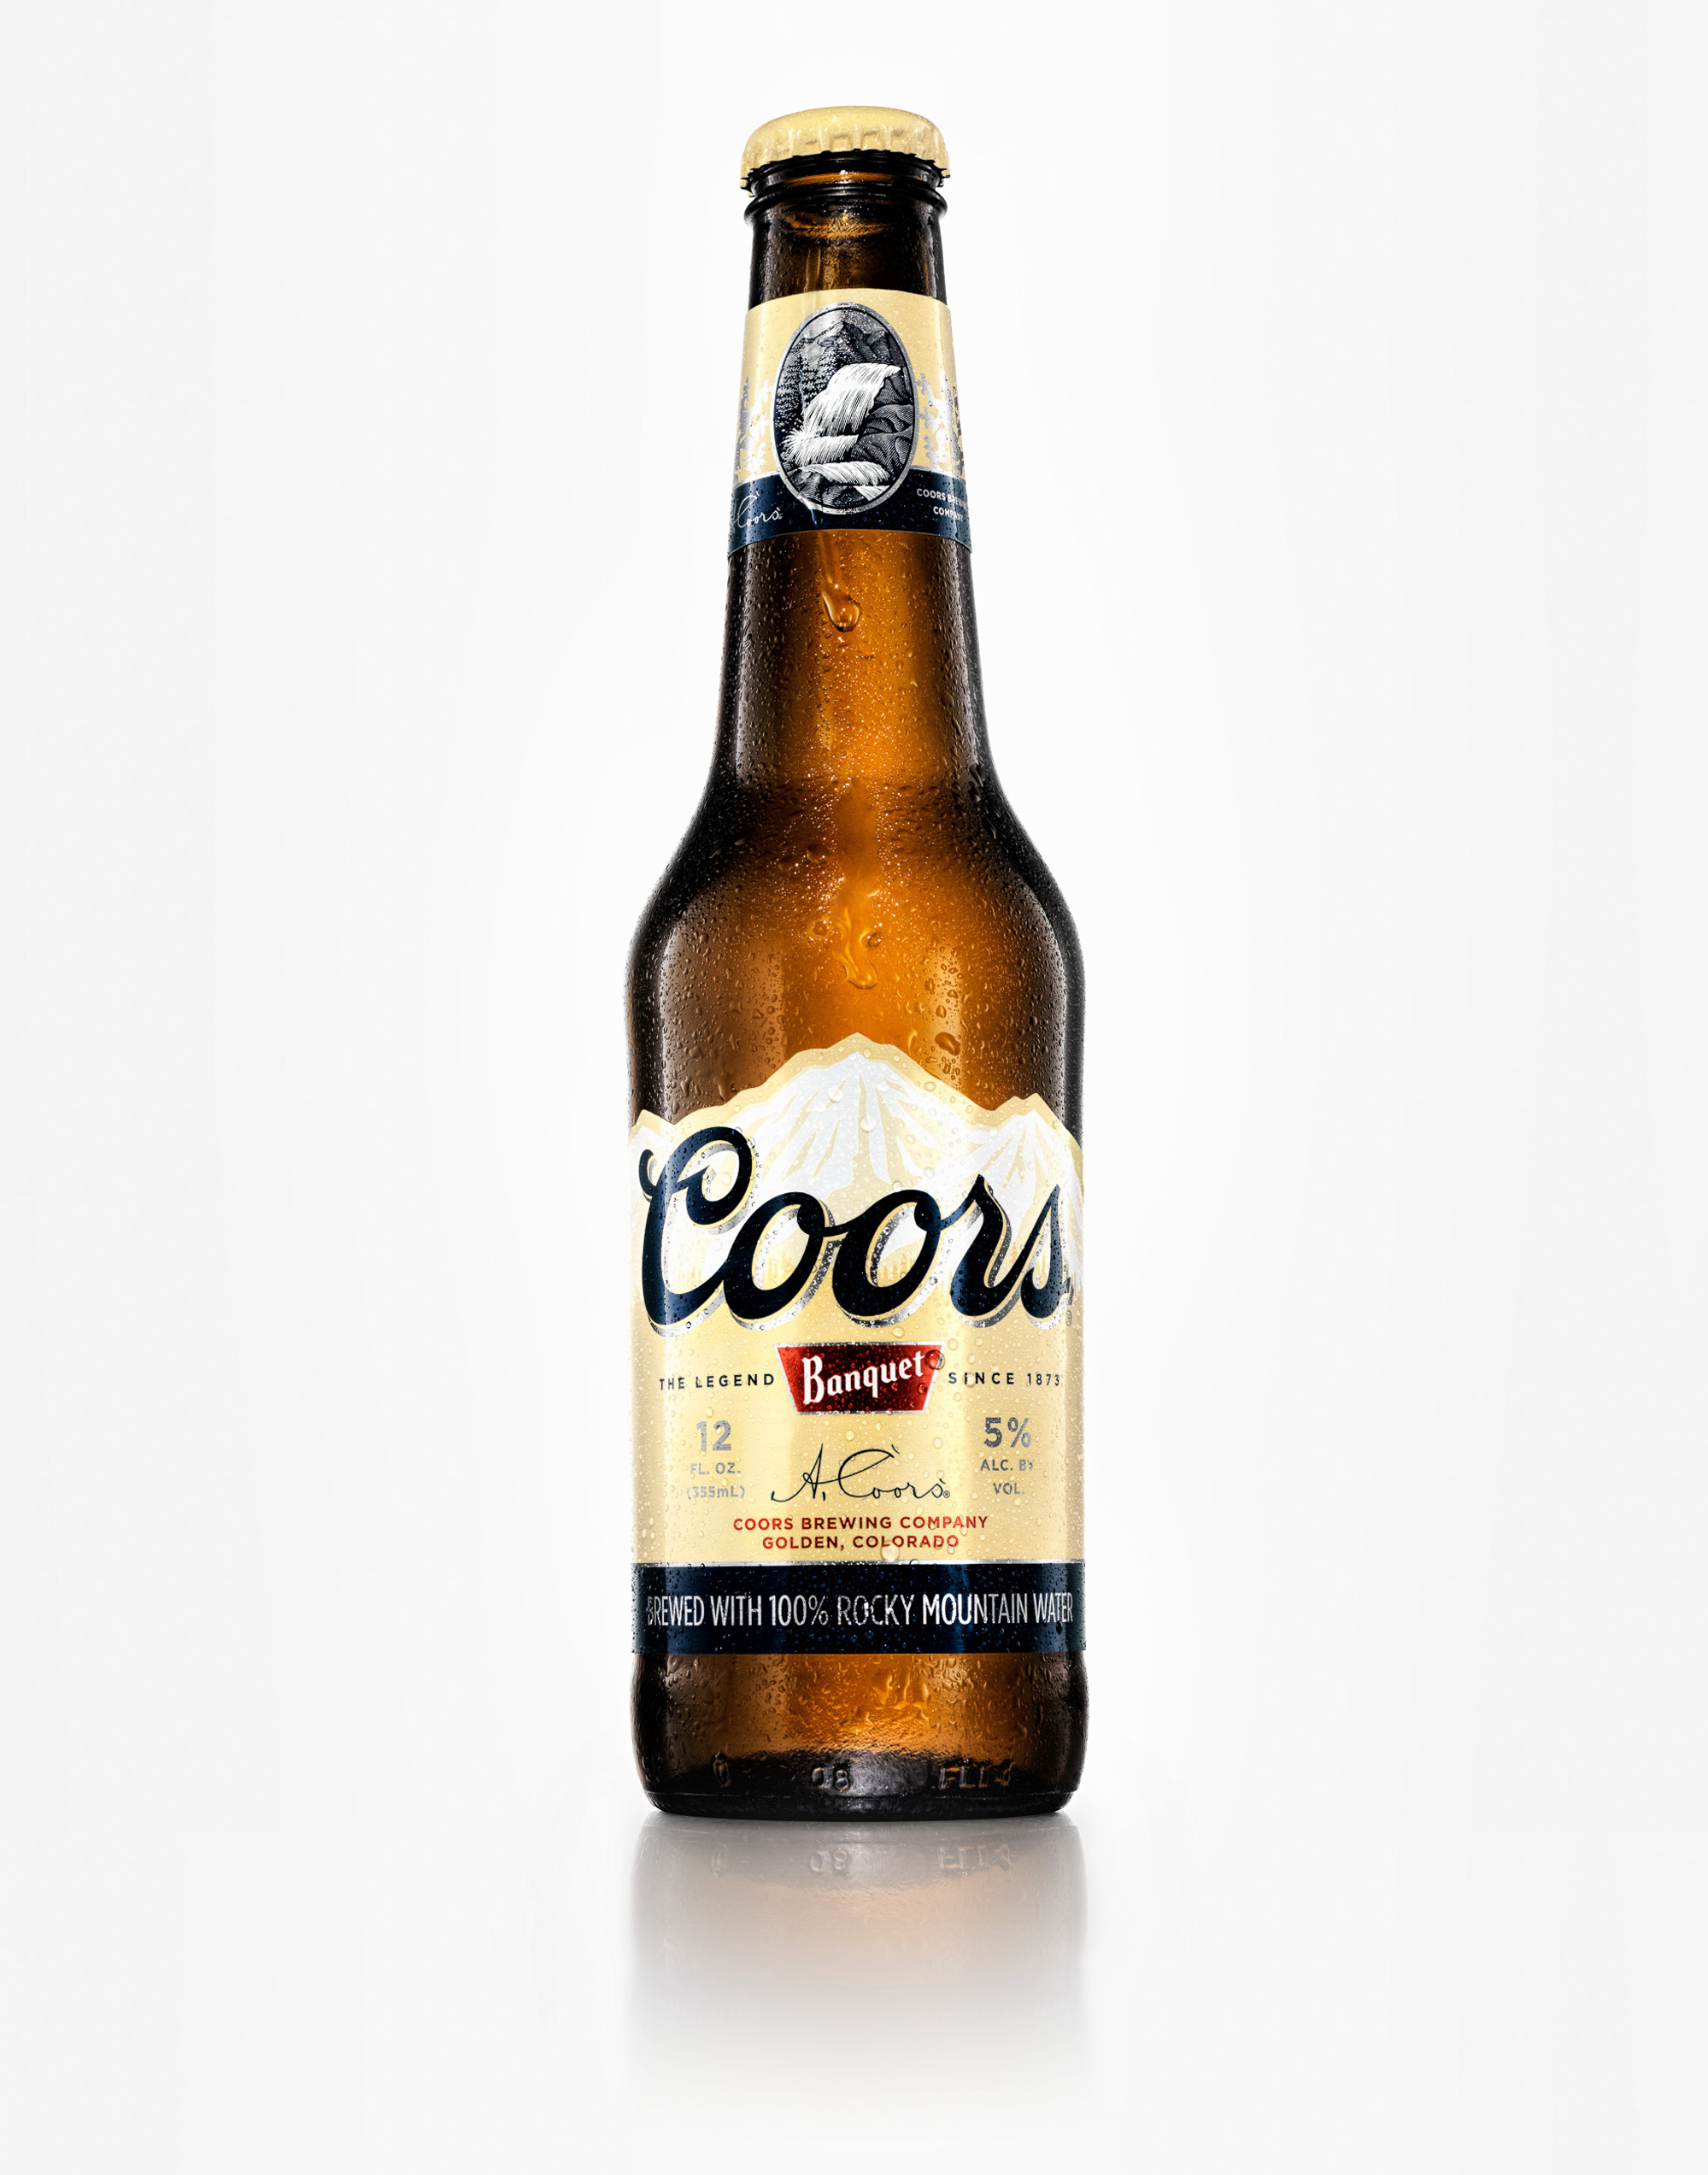 Coors Banquet Beer bottle. Beverage & Liquor product advertising photography by Timothy Hogan Studio in Los Angeles